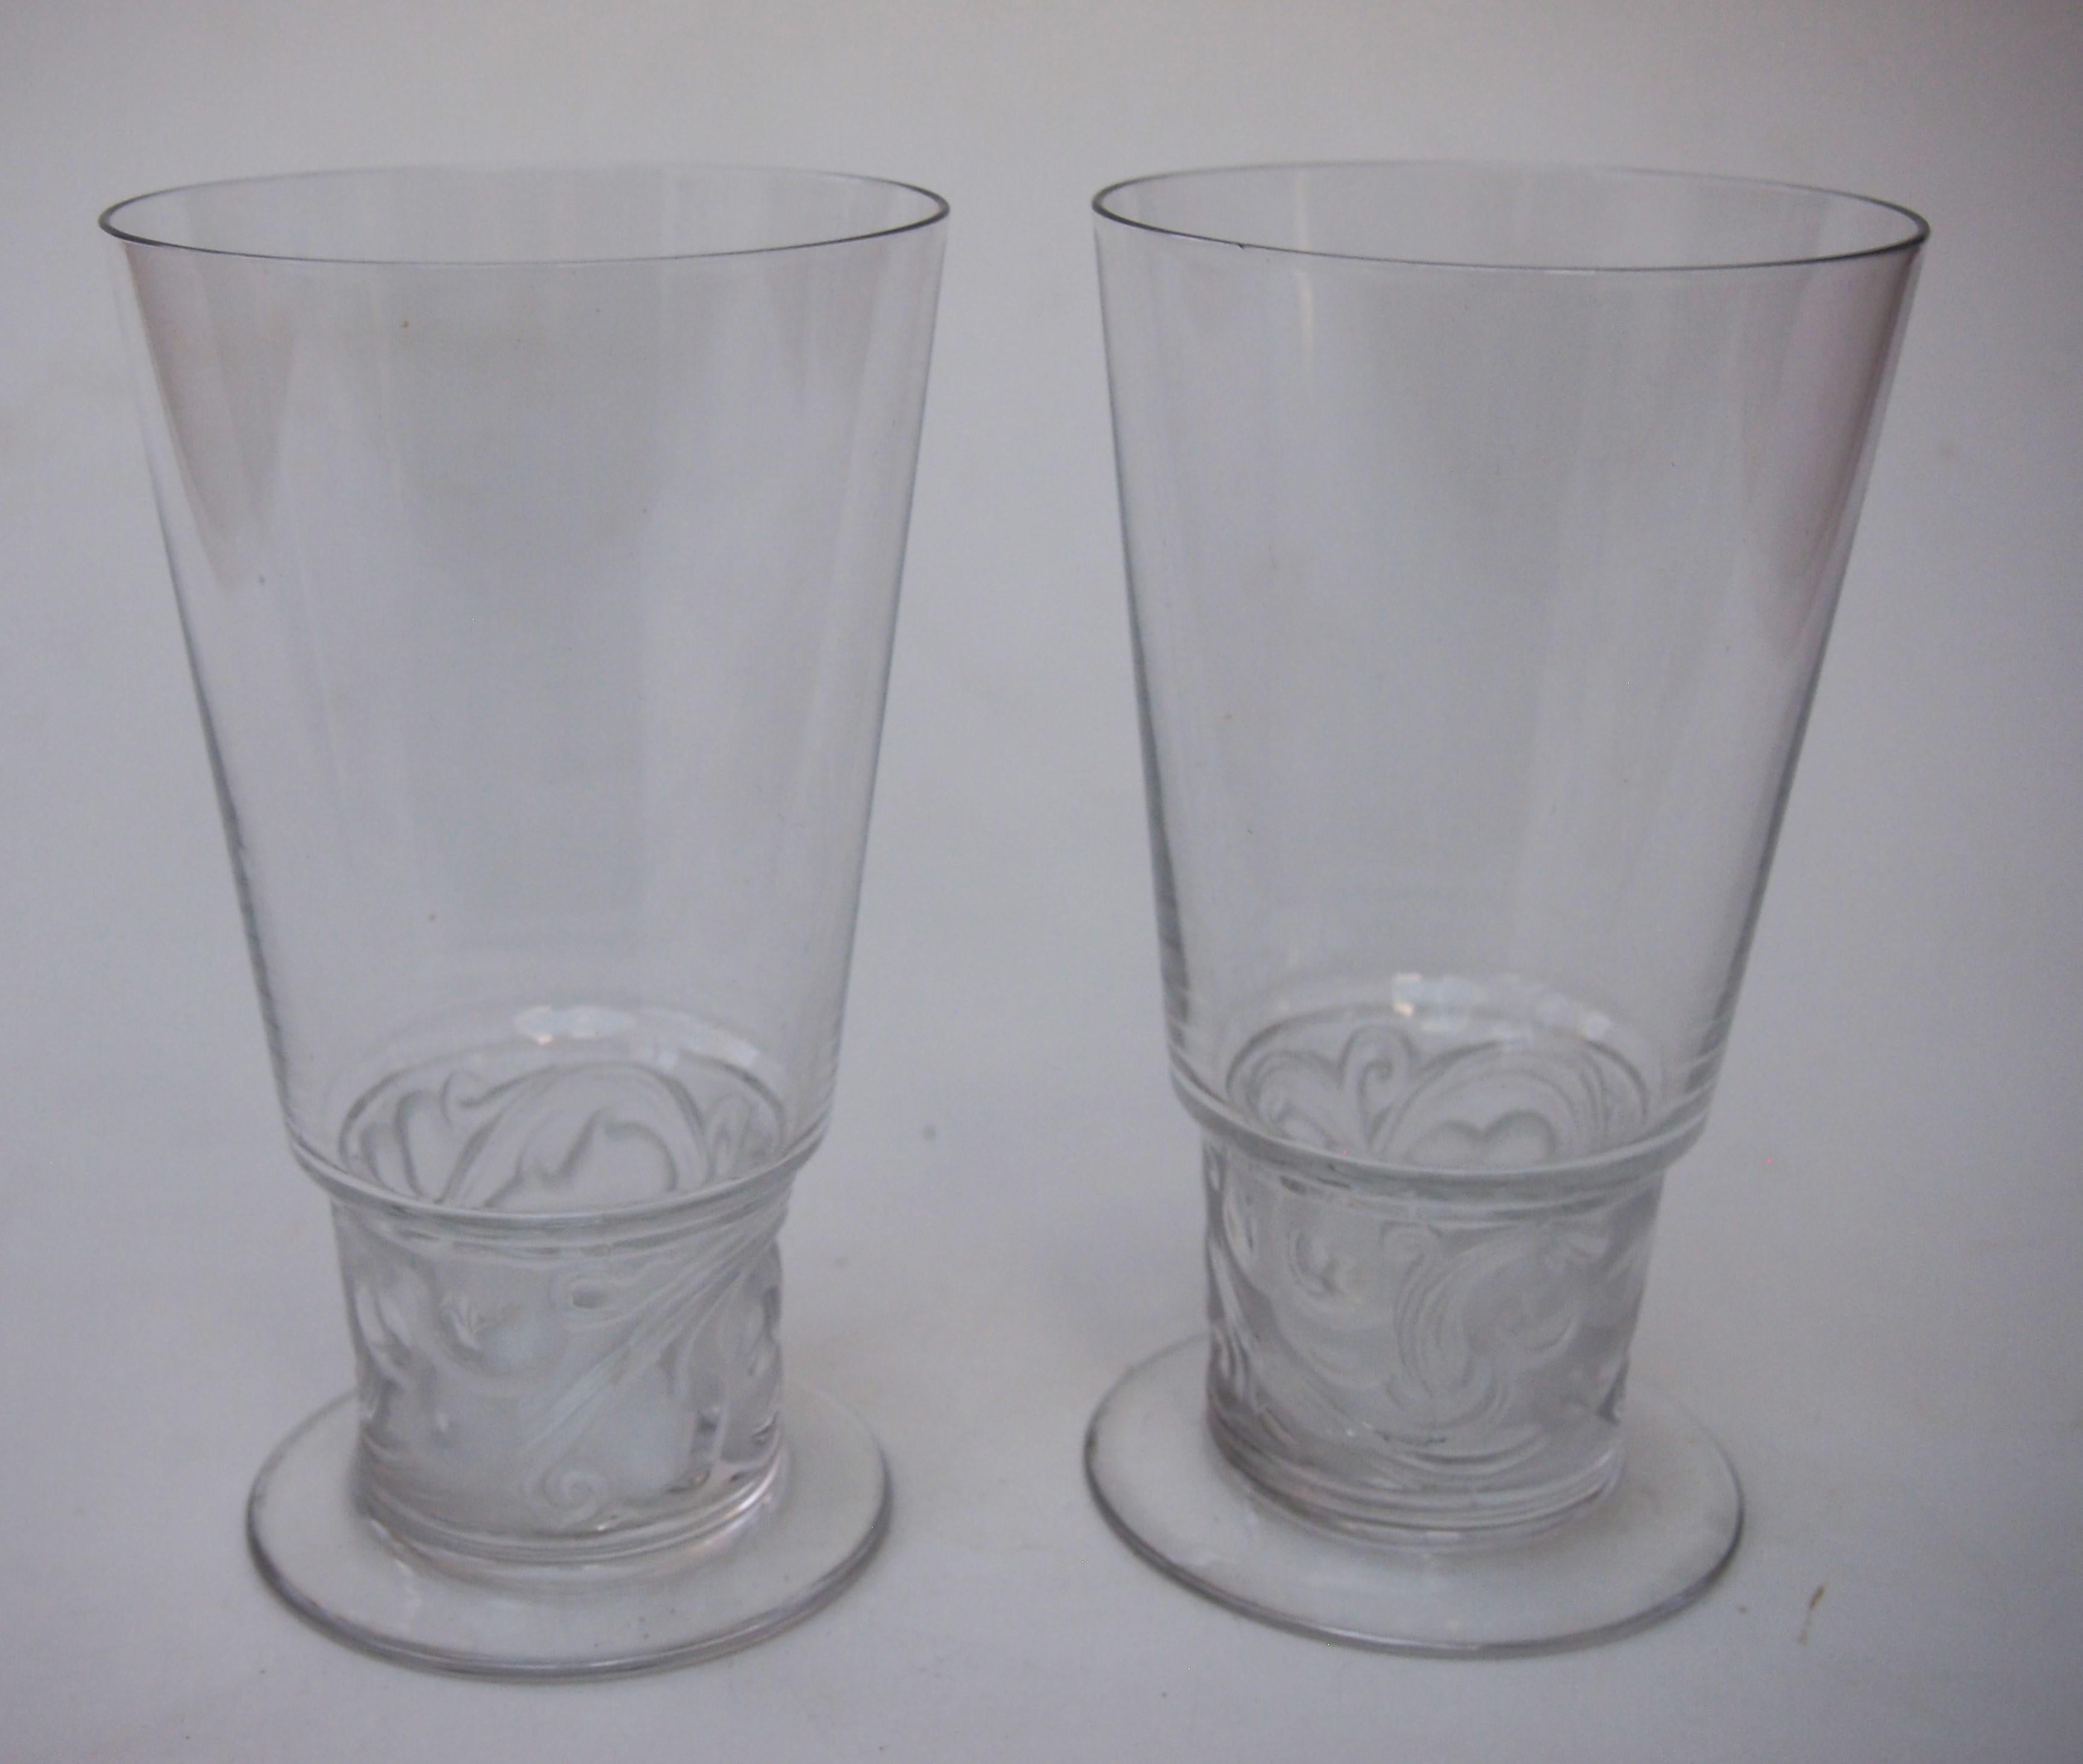 A super pair of signed, clear, glass Rene Lalique 'Marienthal' pattern Whiskey Soda glasses - designed 1931 - Ref Marcilhac 3422 p771 black edition -Both are clearly signed R Lalique. The Marienthal pattern was one of the few design patterns that